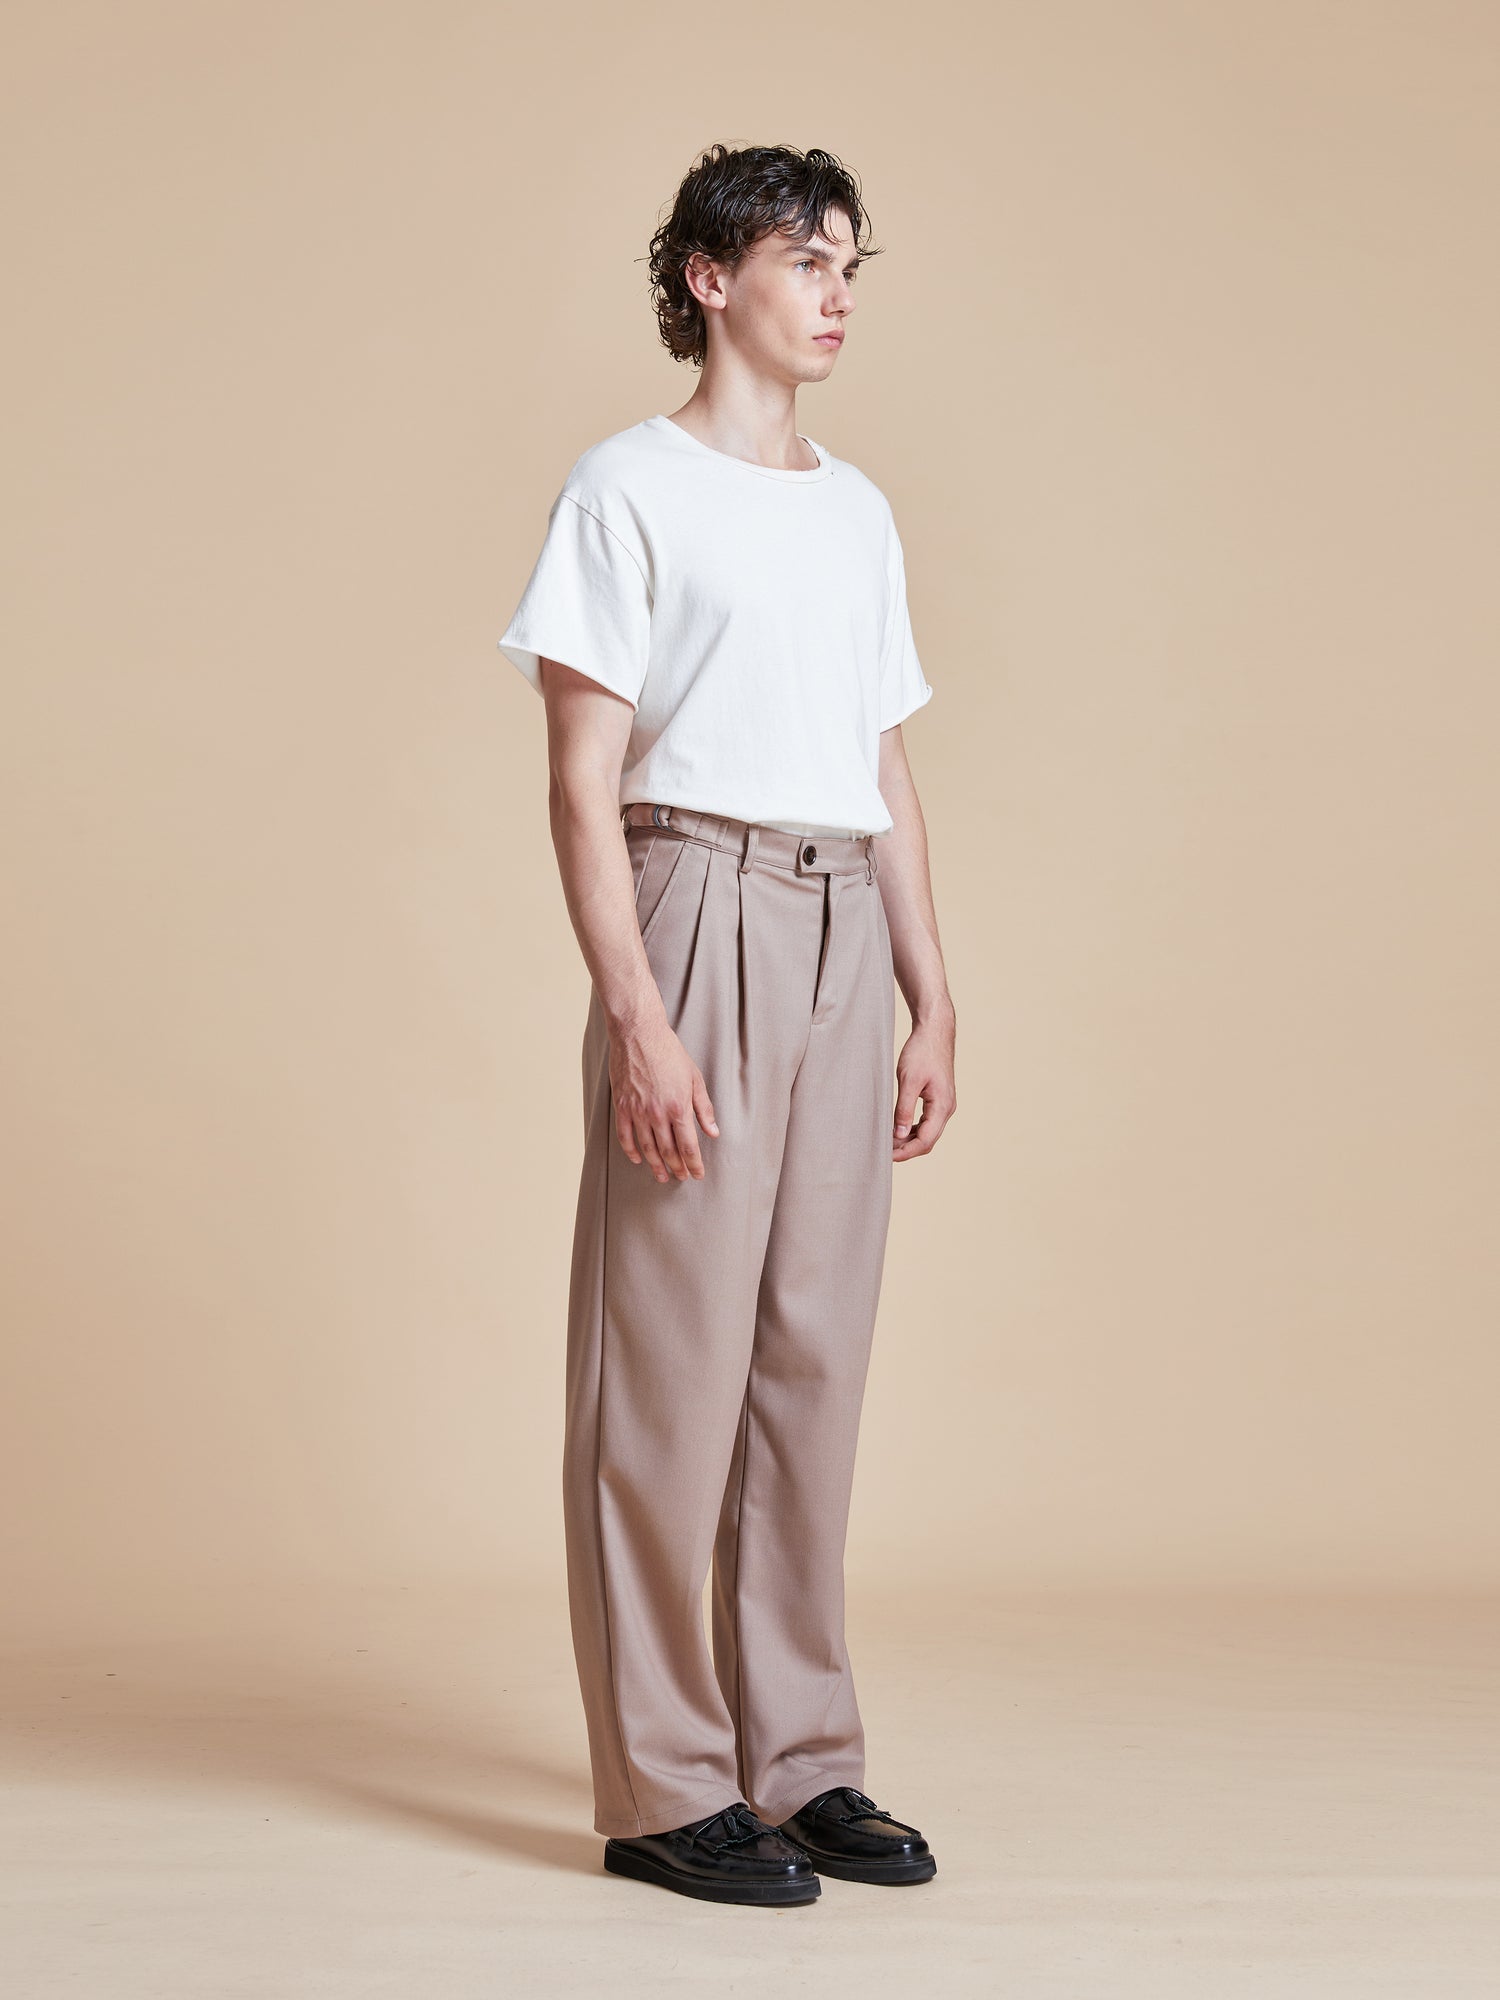 The model is wearing a white t - shirt and beige Found Pleated Trousers.